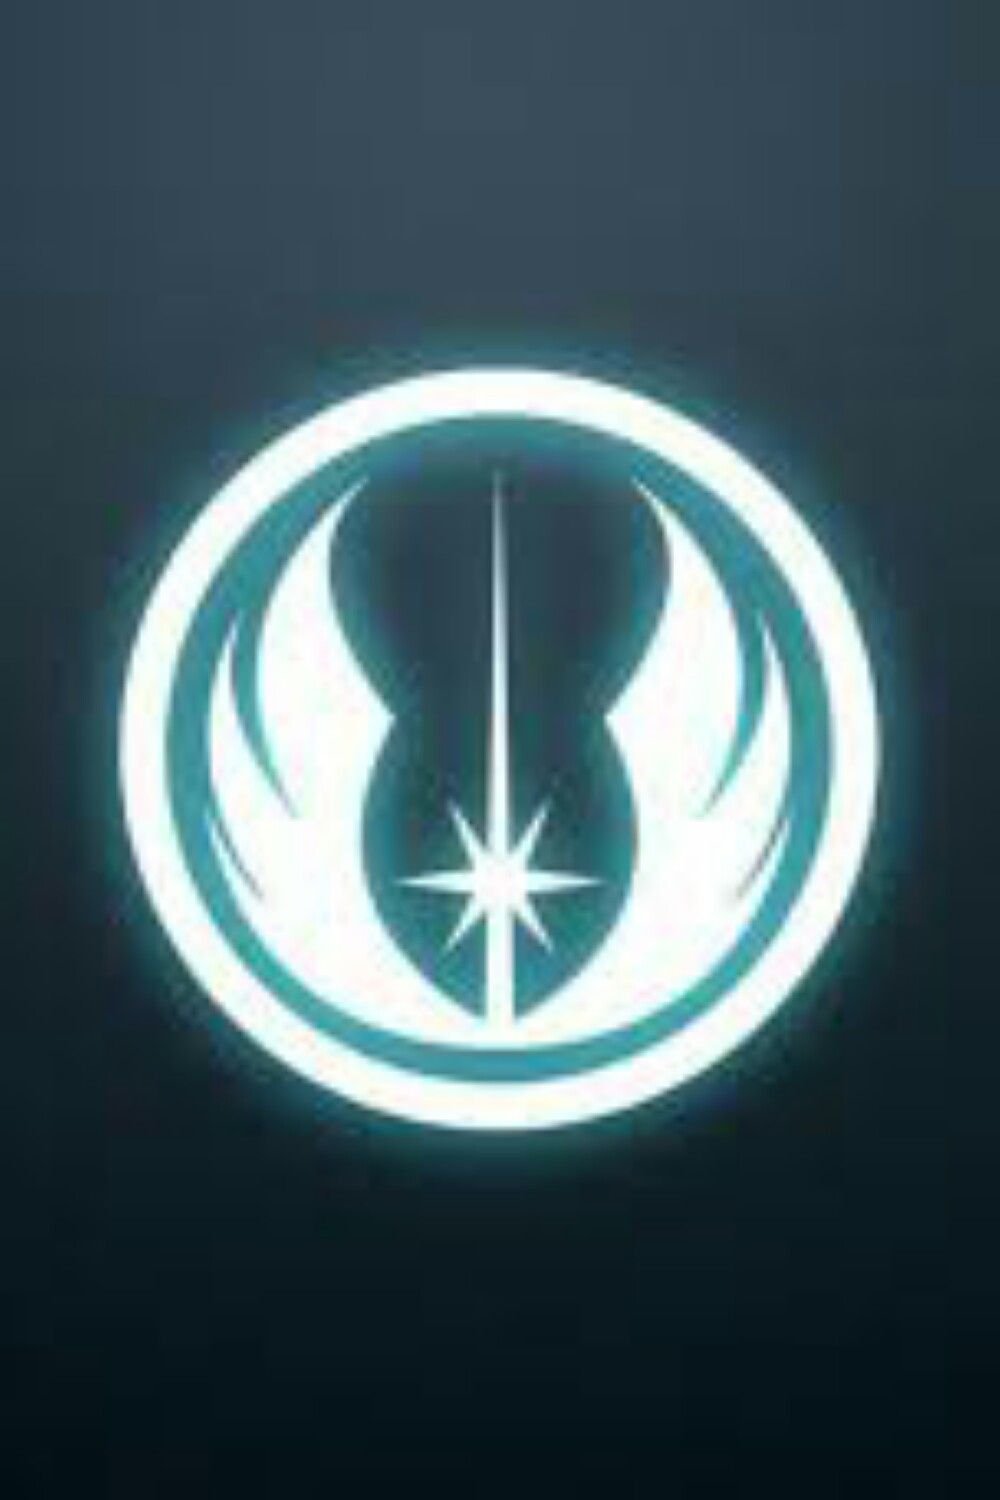 Rangers Of The New Republic Logo Wallpapers